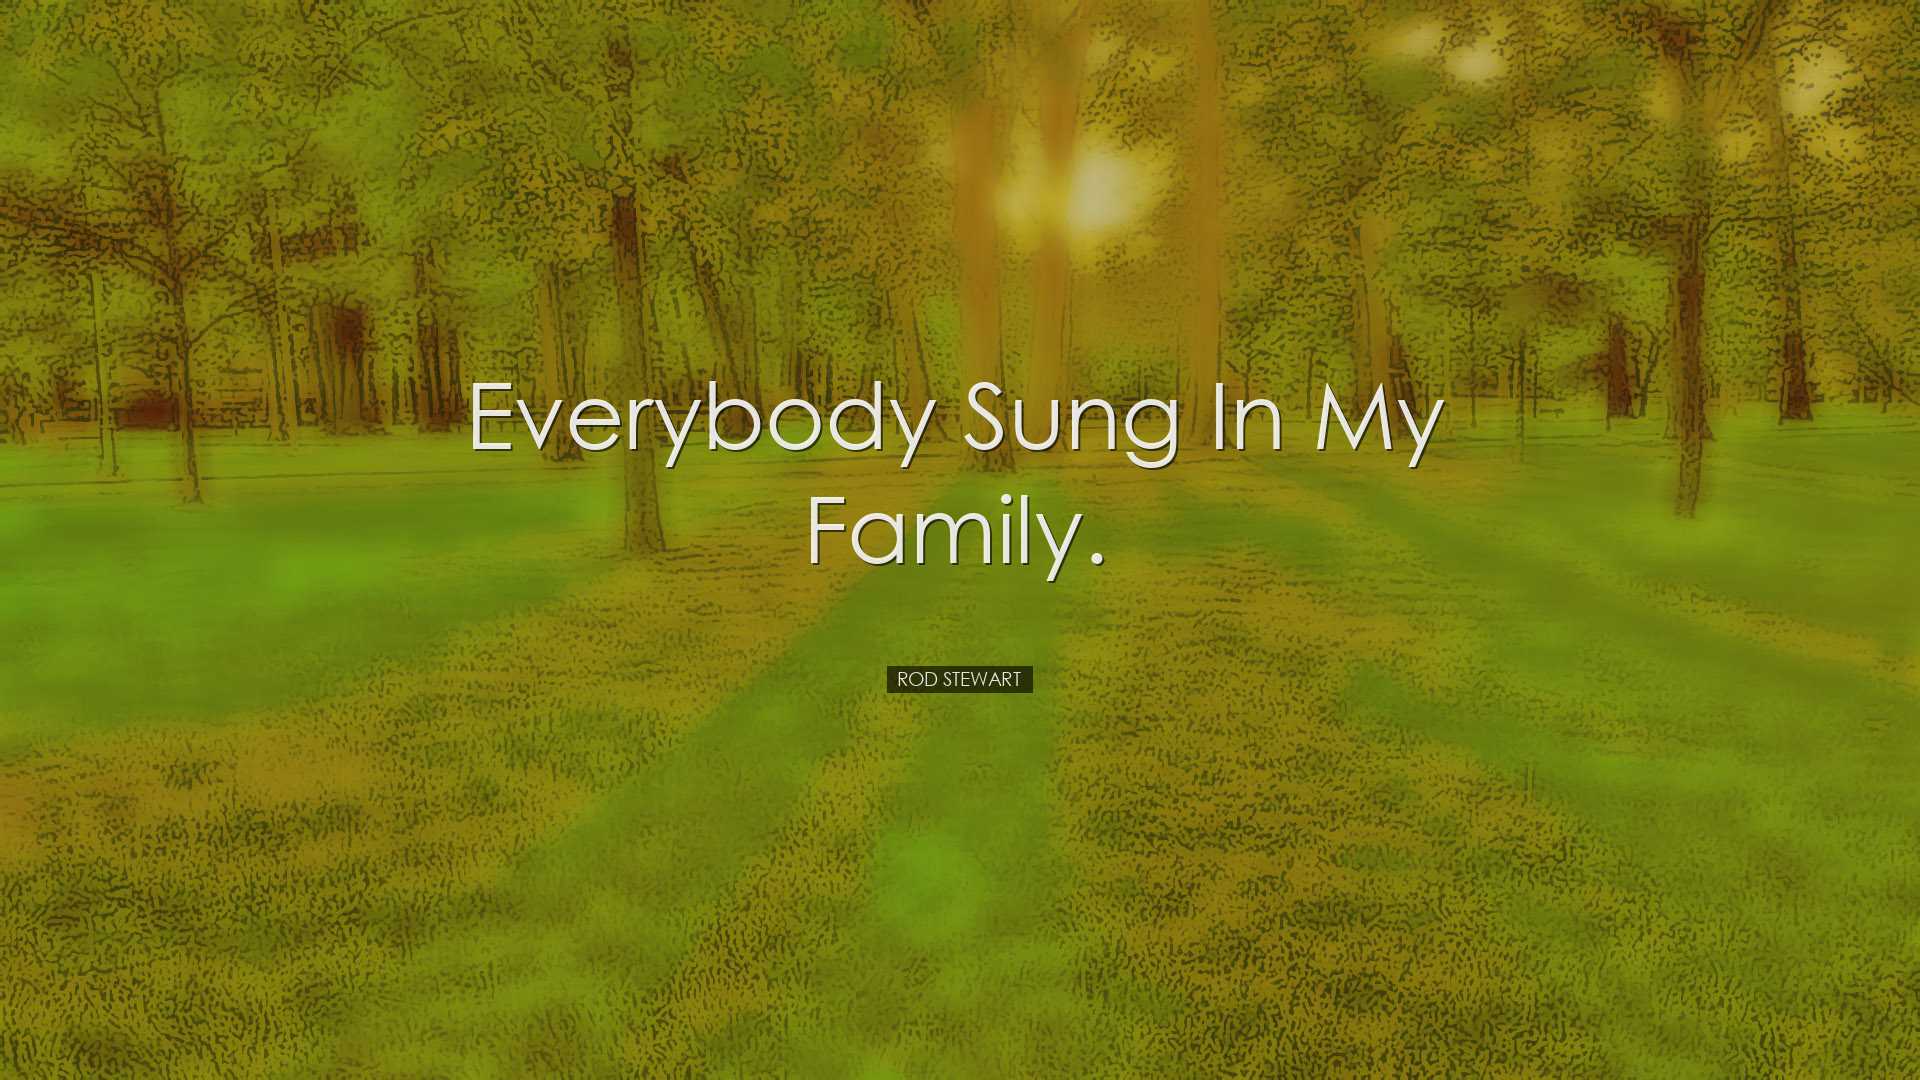 Everybody sung in my family. - Rod Stewart